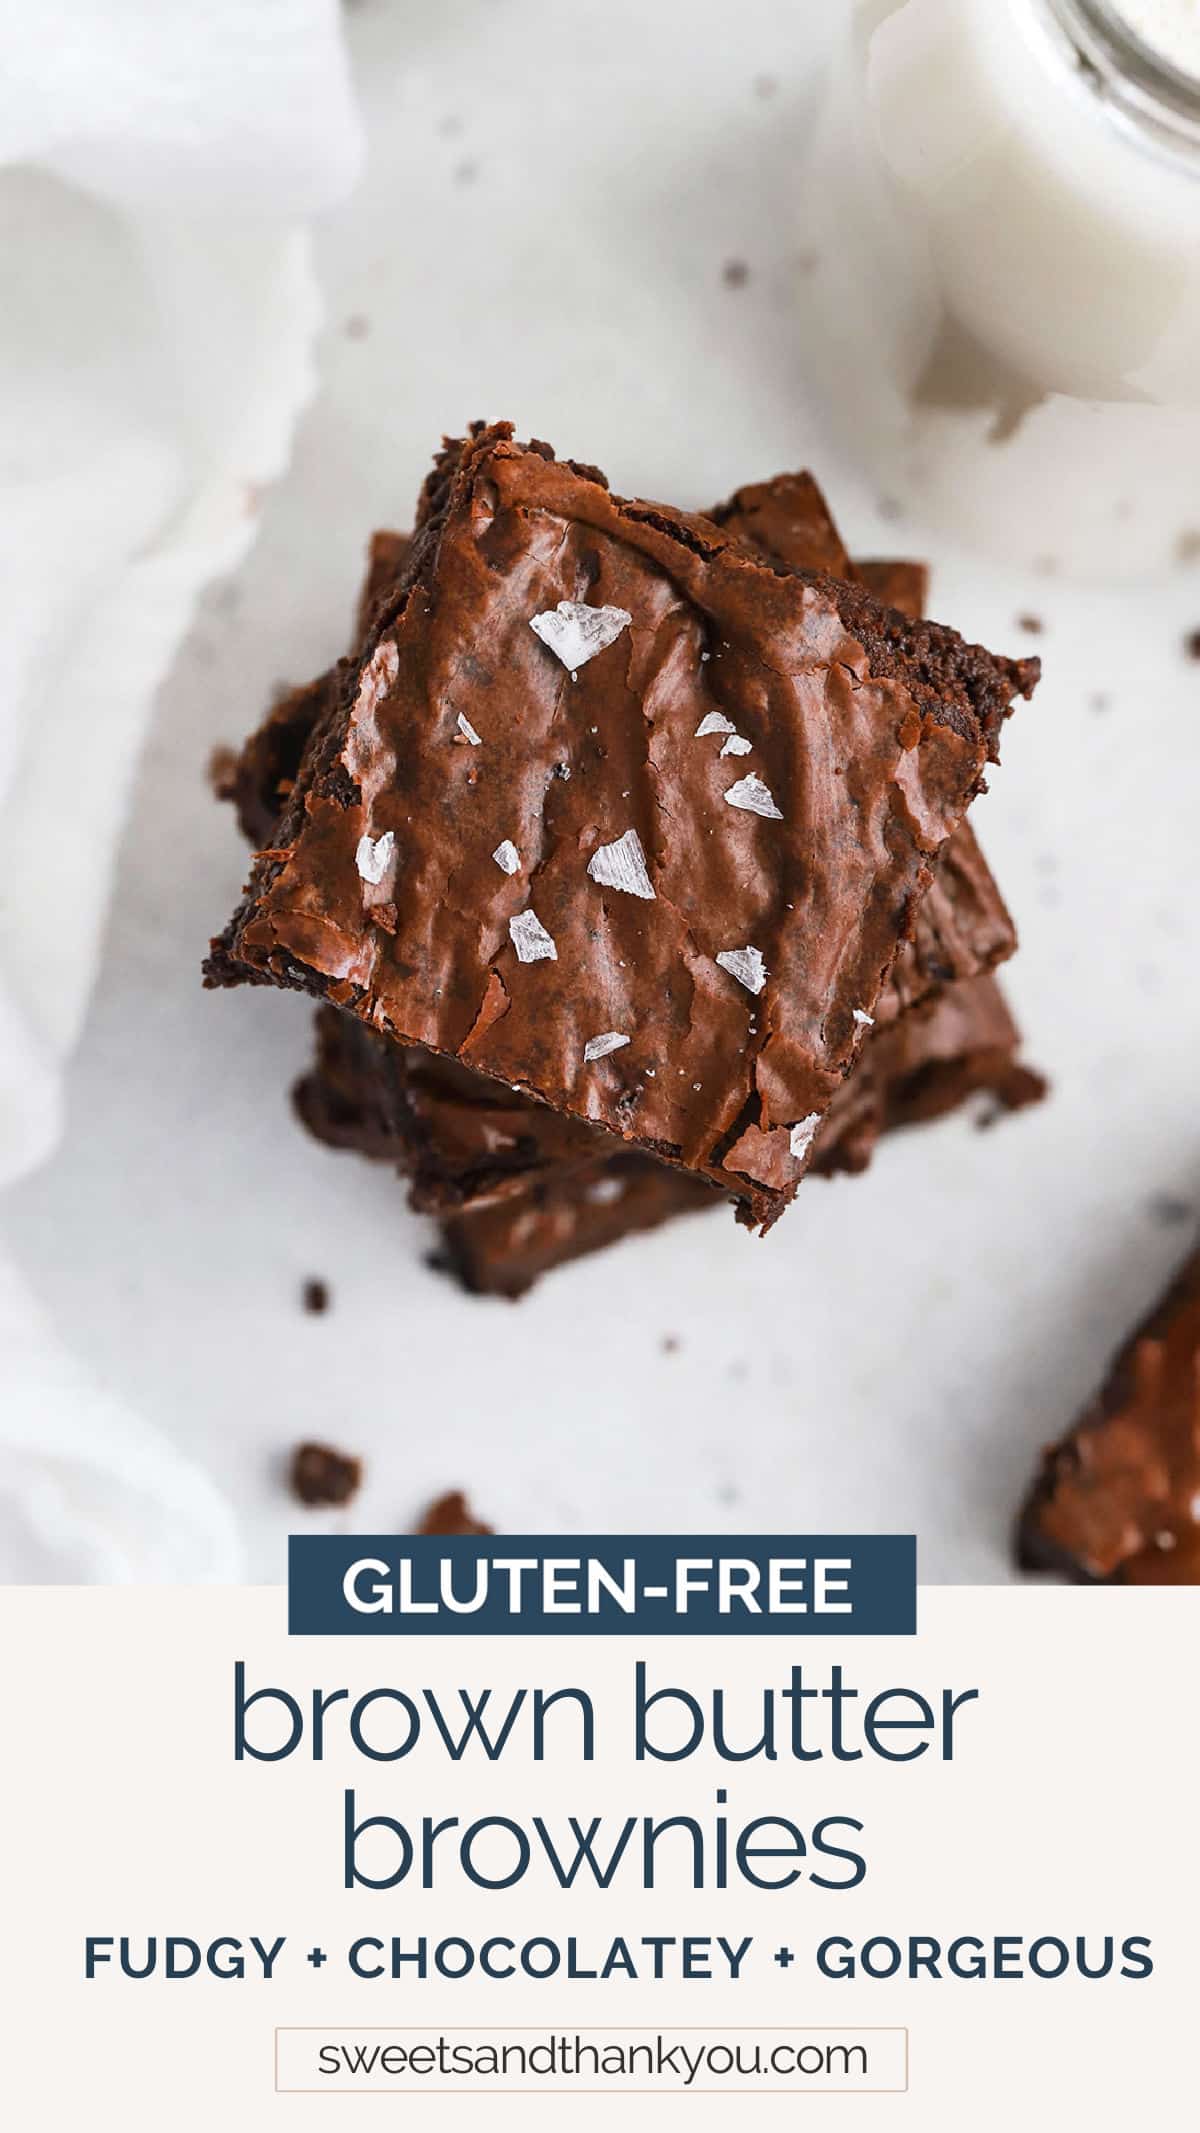 Gluten-Free Brown Butter Brownies - Fudgy gluten-free brownies that are perfect for a cozy day or chocolate craving. // Brown Butter Brownie Recipe // Gluten Free Brownies // Gluten-Free Baking // Easy gluten-free brownies // gluten free brownie recipe // gluten-free brownies with crackly tops / fudgy gluten-free brownies / chewy gluten-free brownies 